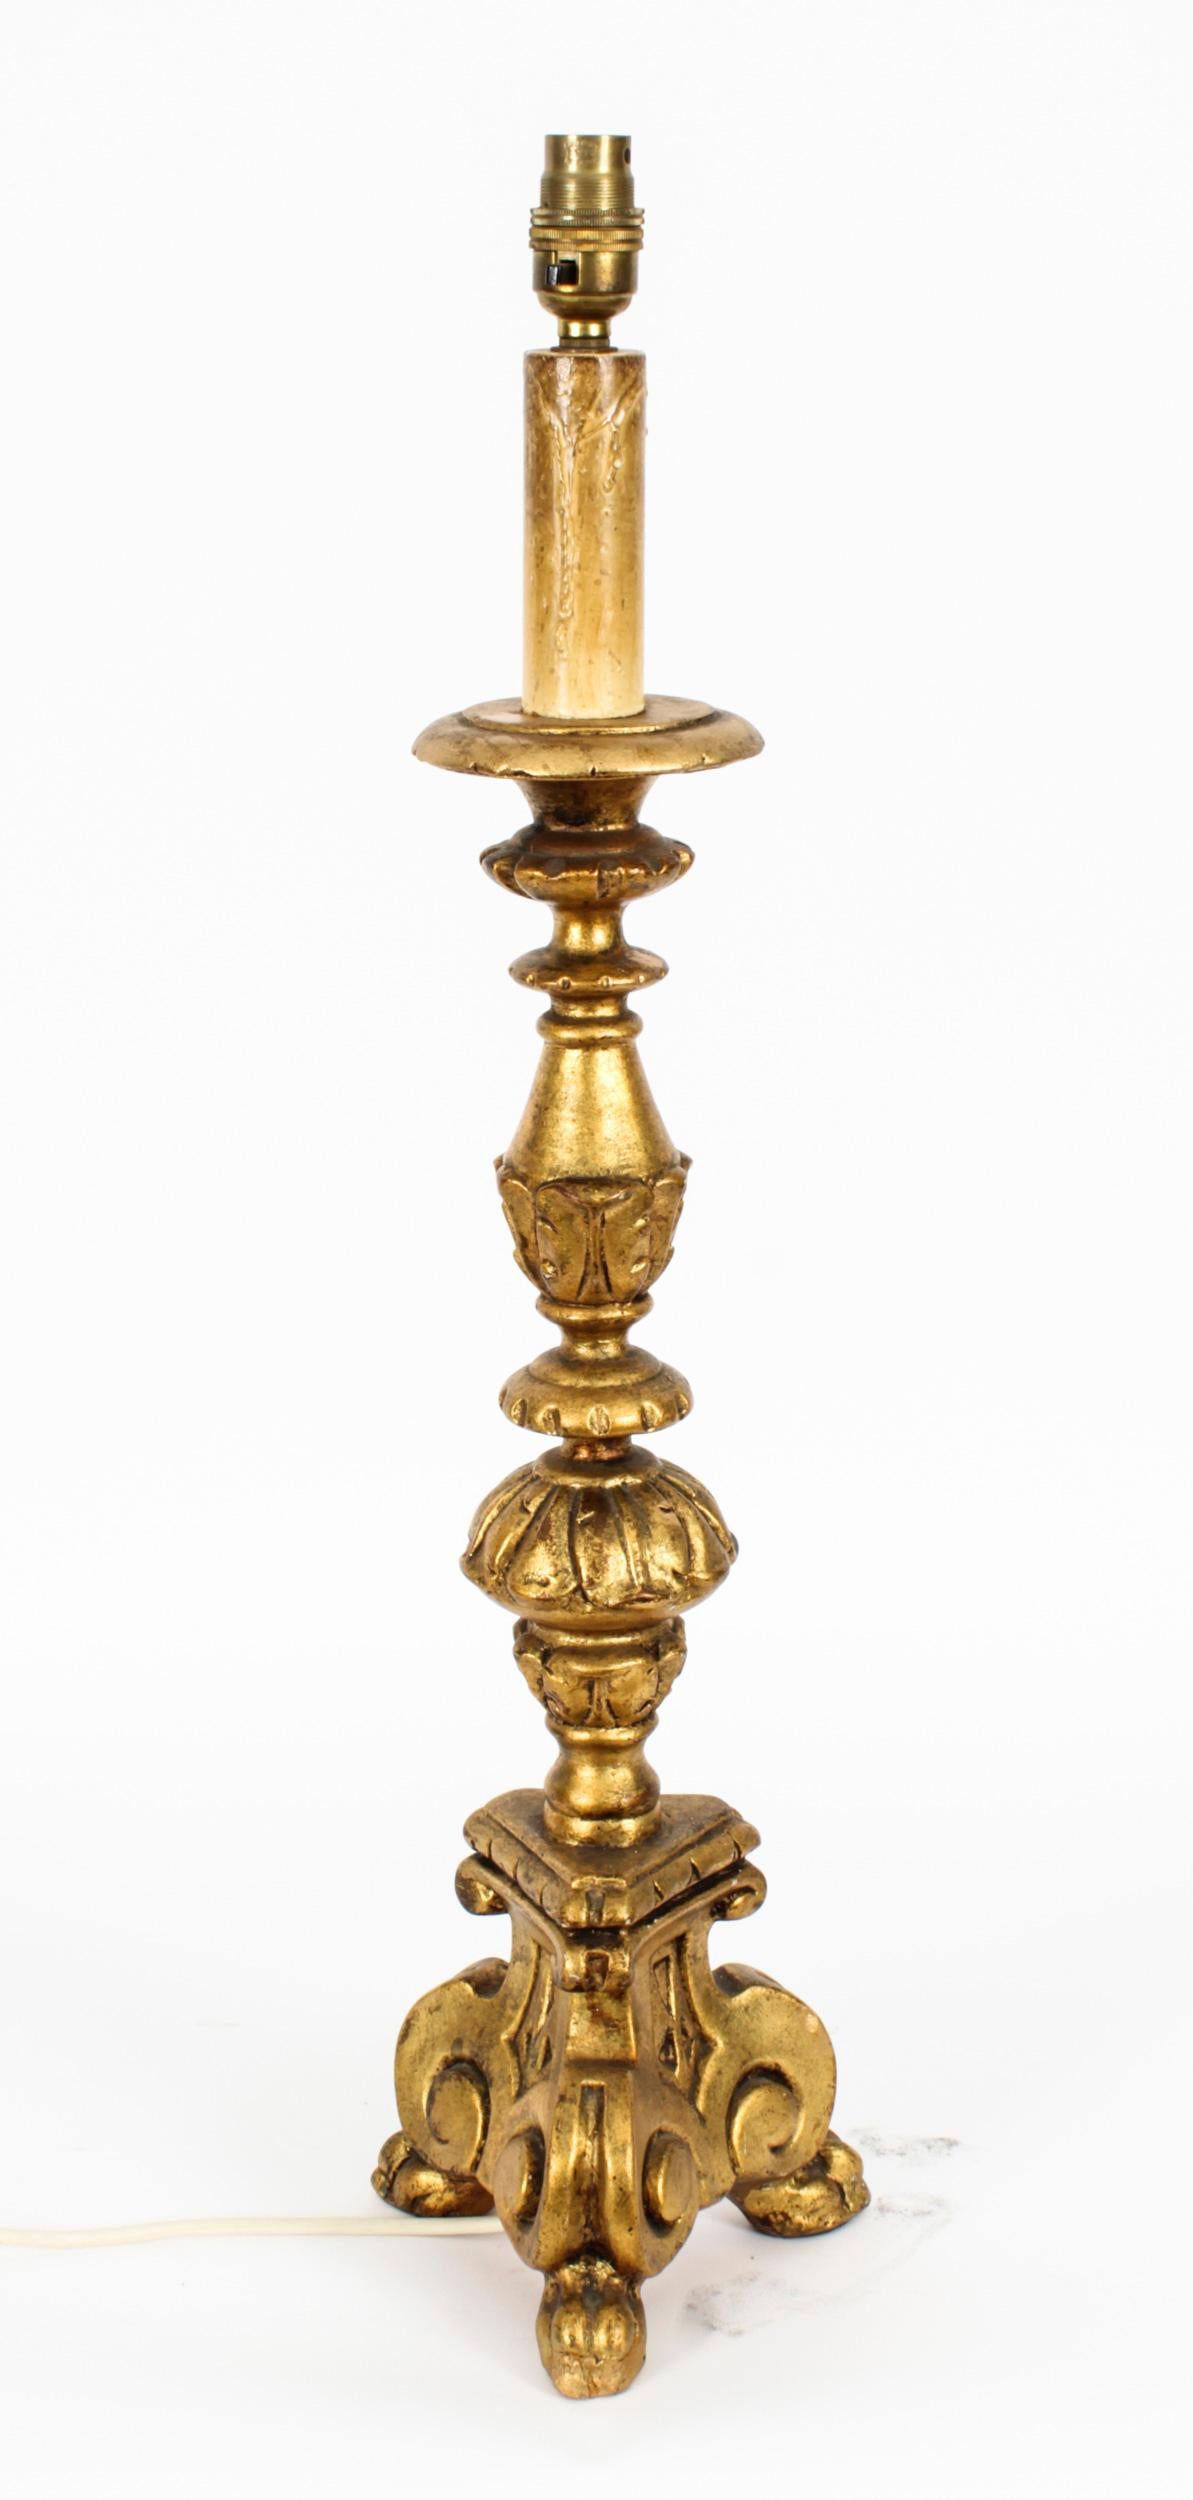 This is a splendid vintage Italian gilded Baroque lamp, mid 20th century in date.

This opulent table lamp features candle head with a stem decorated with classical ornate foliage in the form of splendid acanthus leaves on a tripod hoof